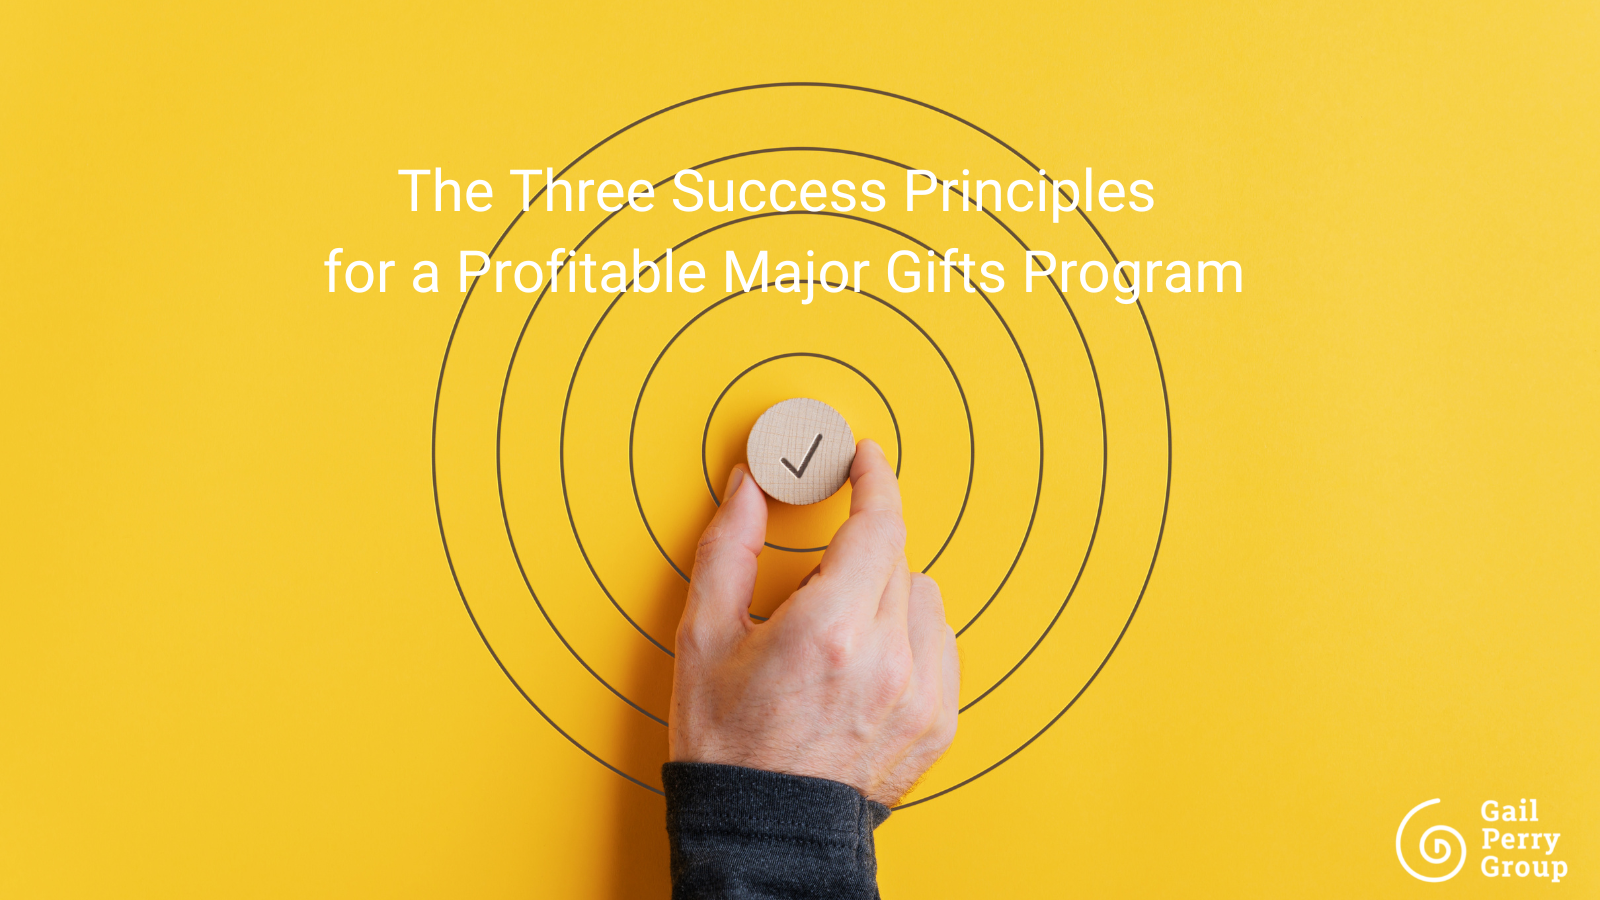 The Three Success Principles for a Profitable Major Gifts Program